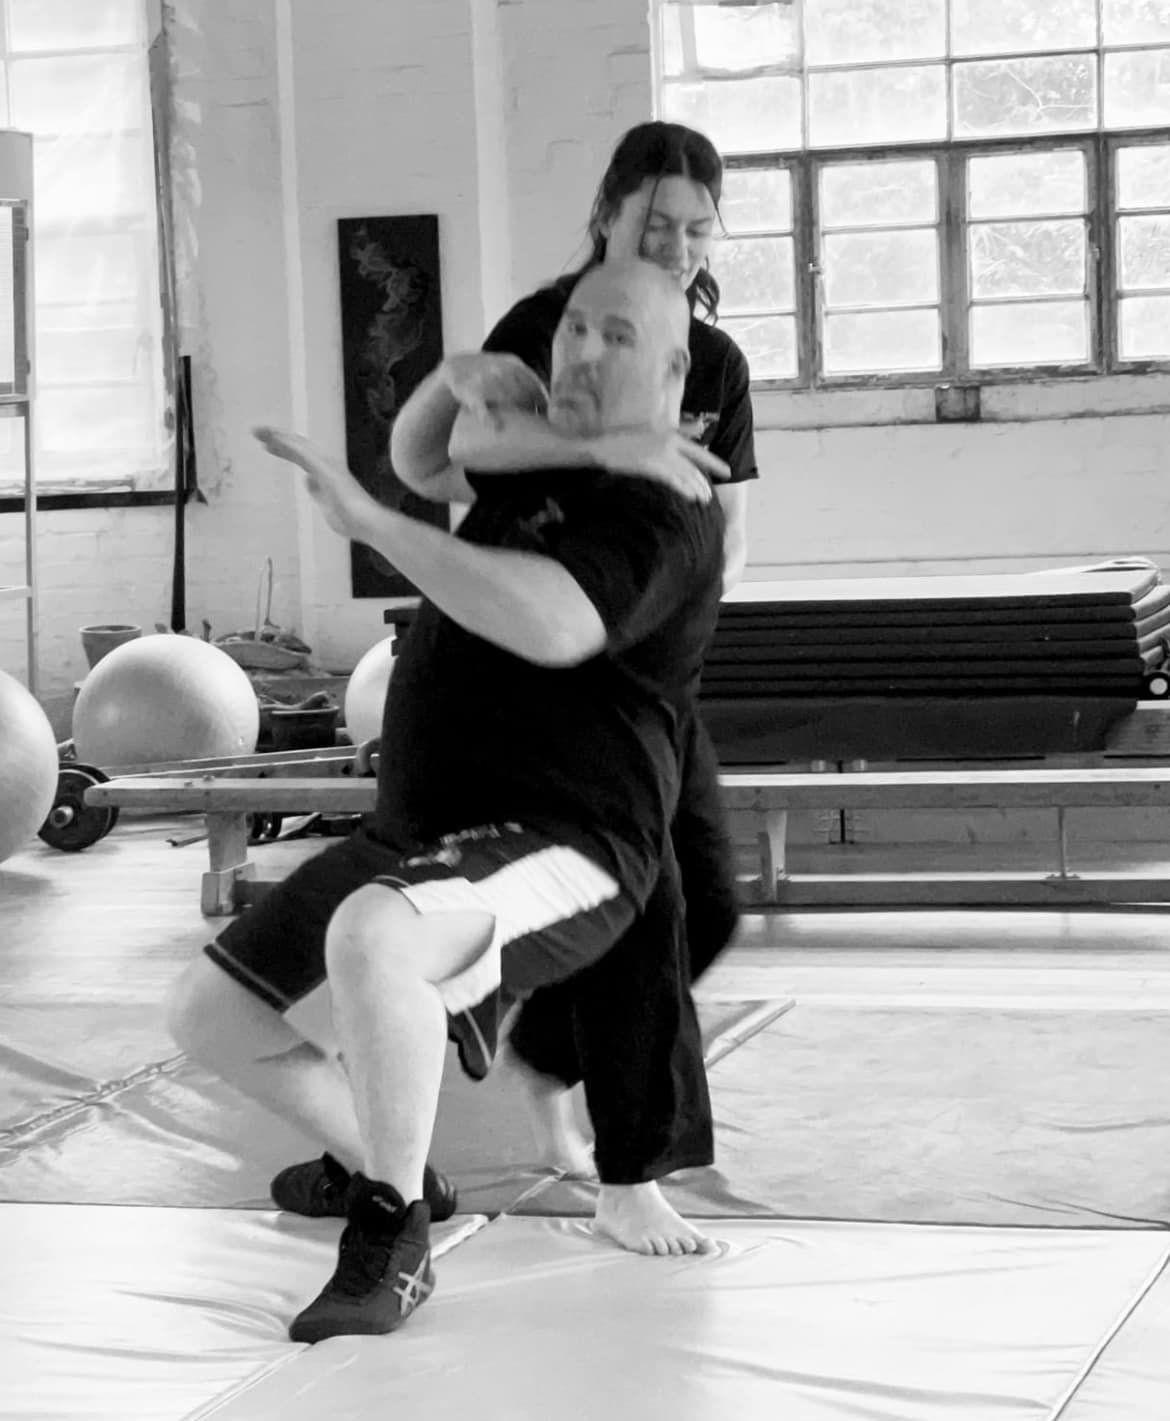 self defence and krav maga in Chepstow